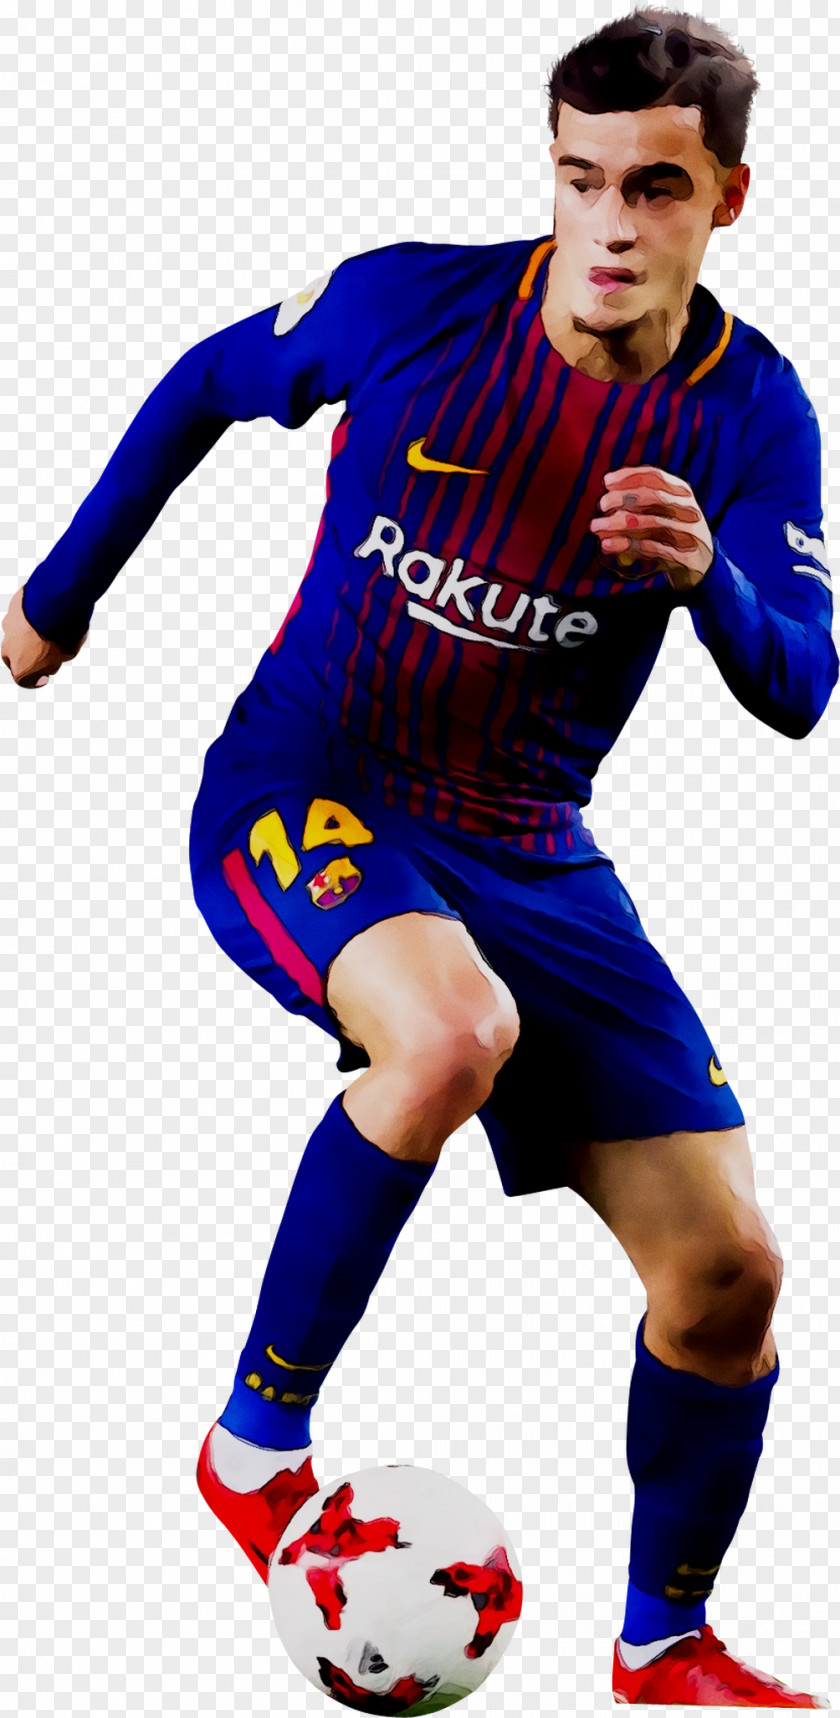 Philippe Coutinho FC Barcelona Liverpool F.C. Image PNG